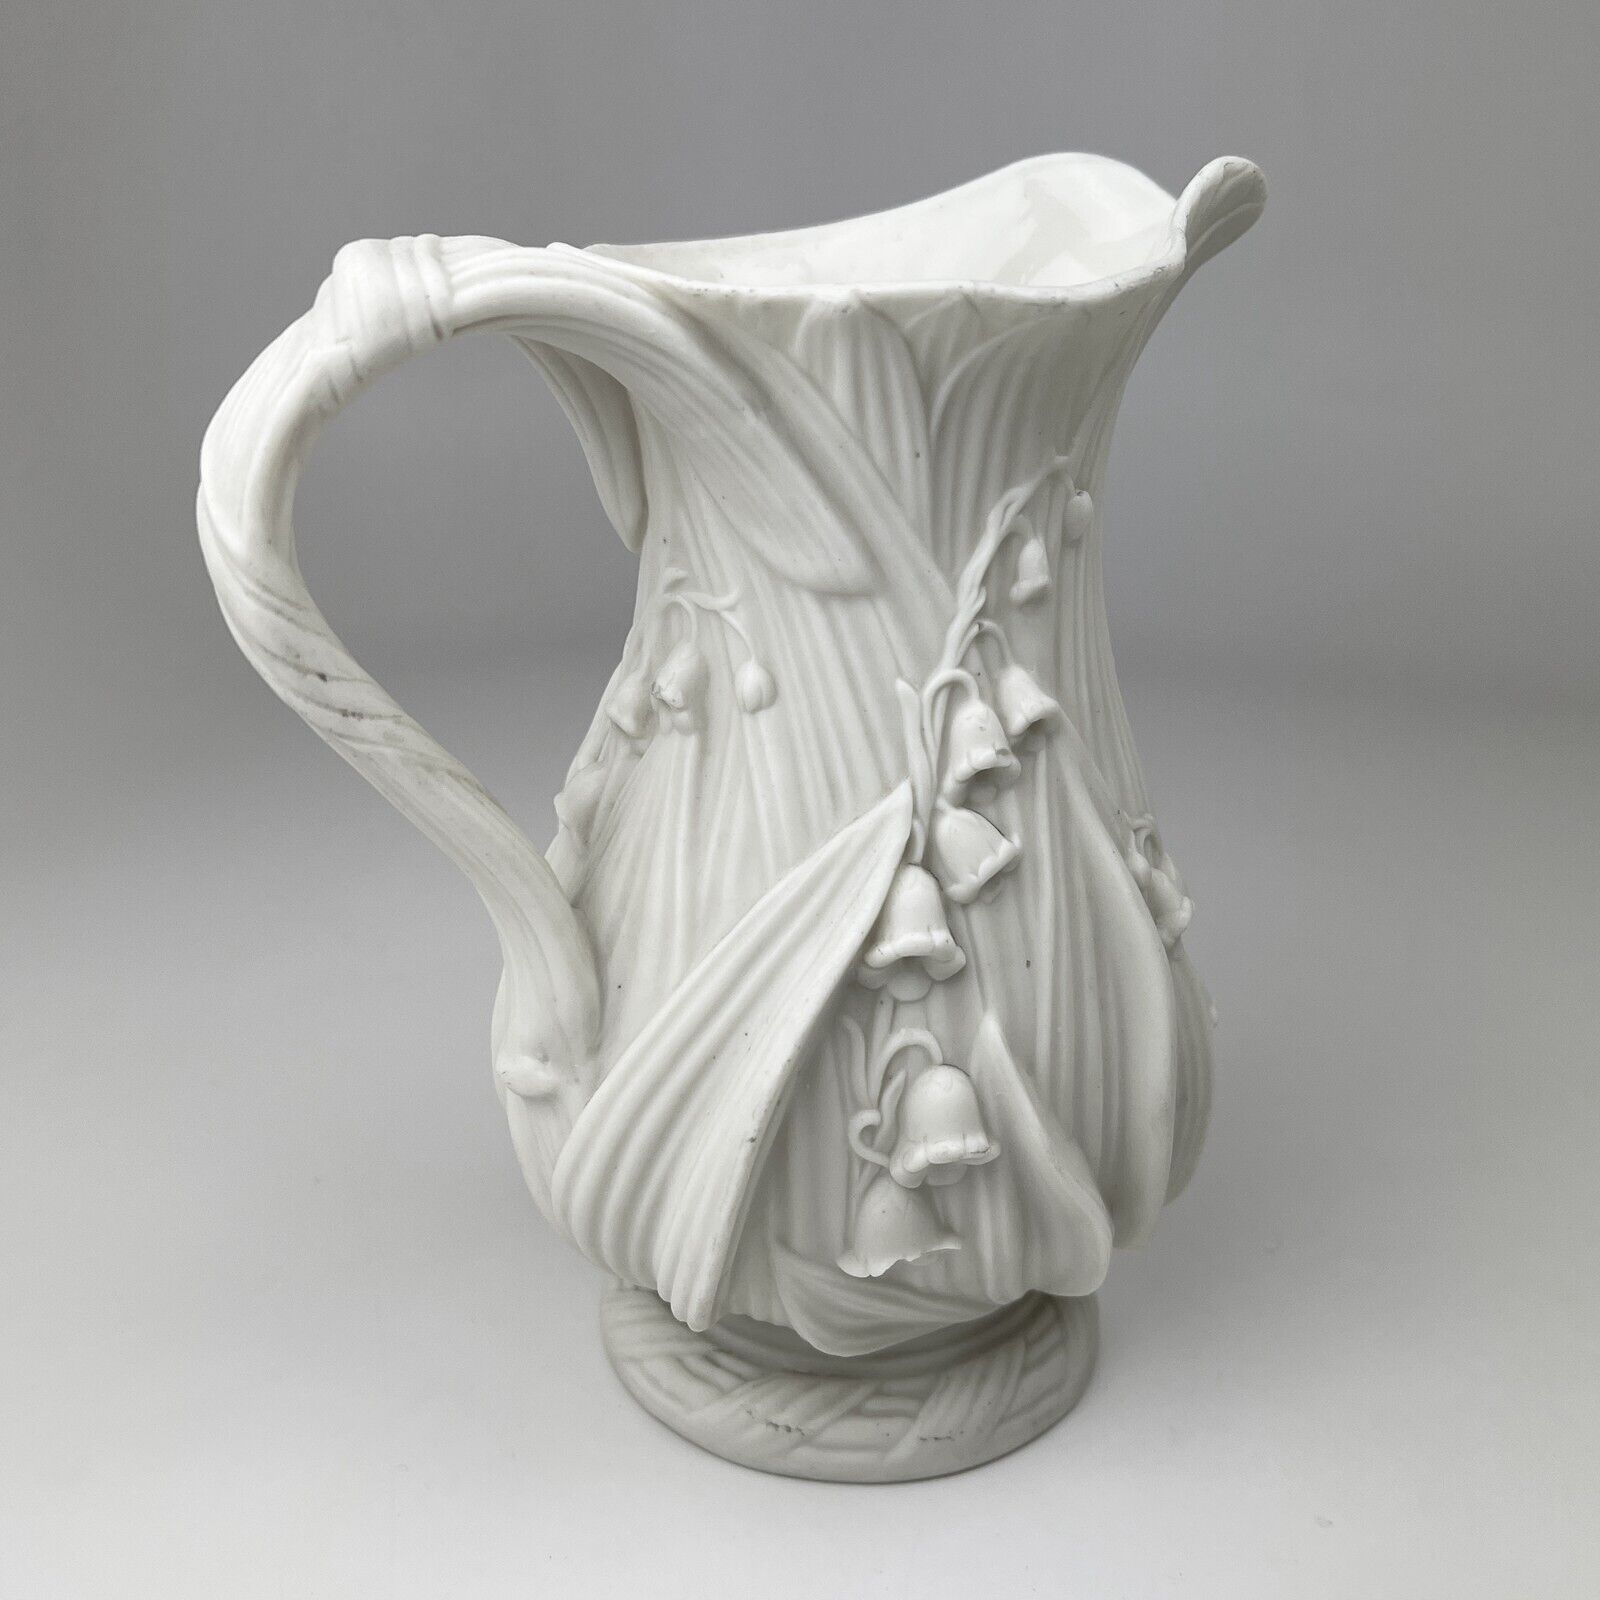 VERY RARE Copeland Parian Ware  Lily Of The Valley Jug Pitcher, C 1850, England